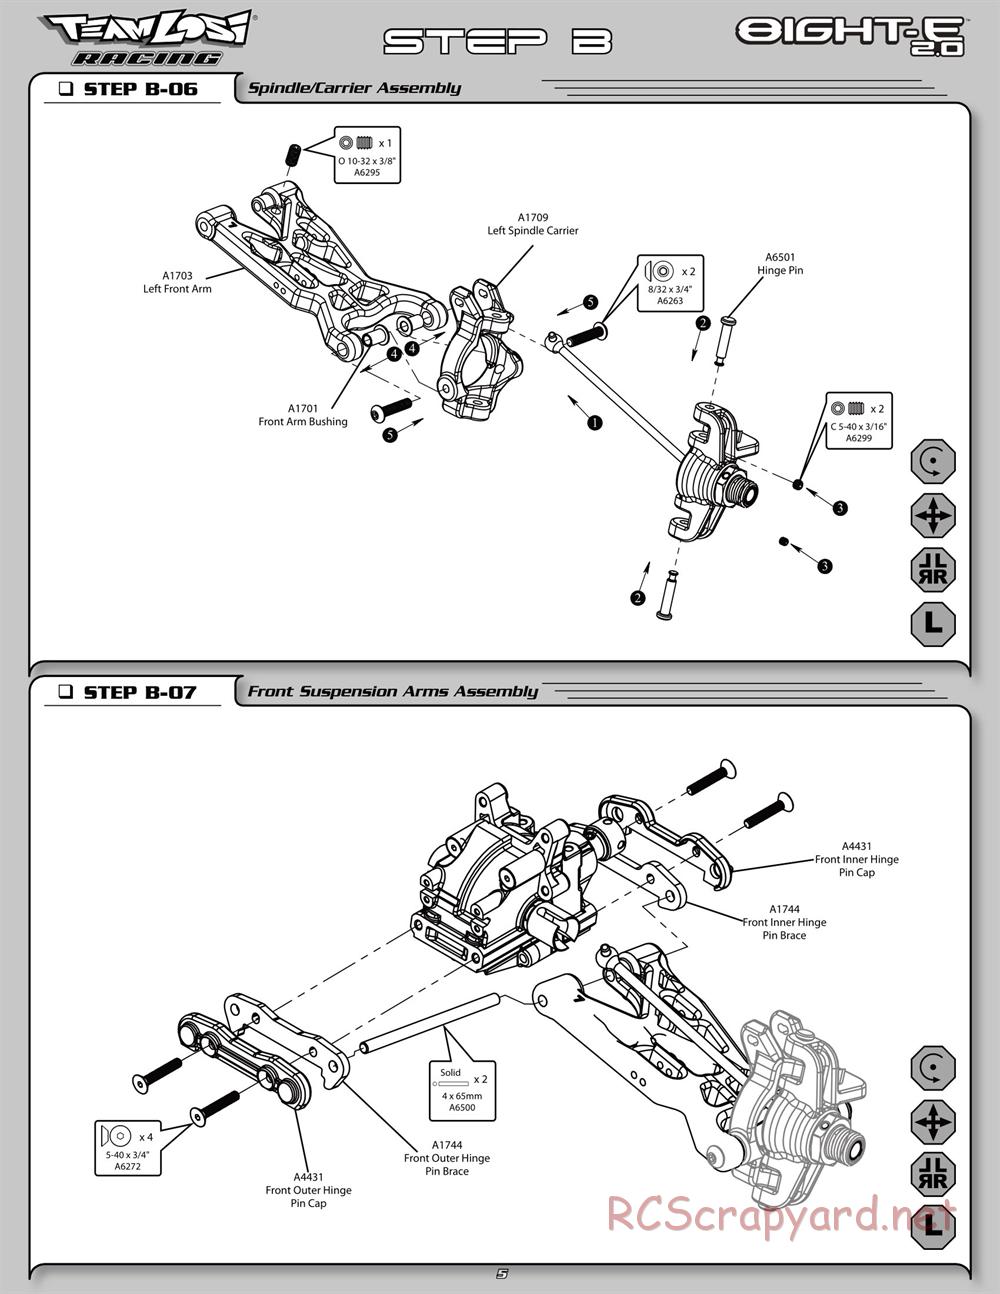 Team Losi - 8ight-E 2.0 Race Roller - Manual - Page 12